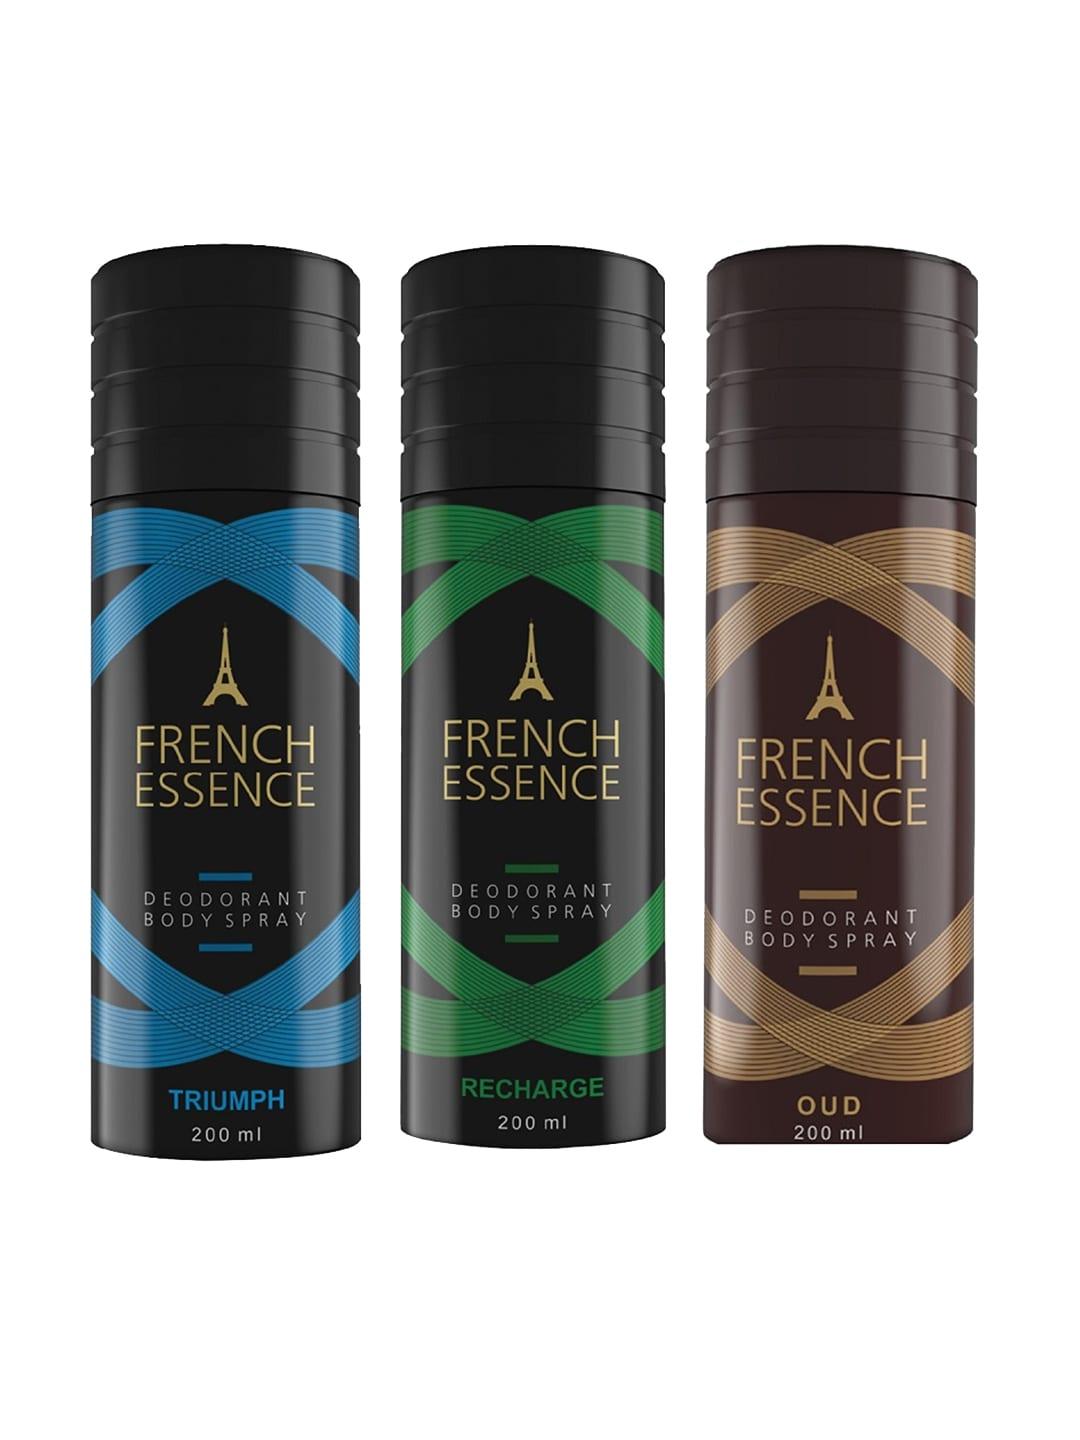 french essence set of 3 deodorants 200 ml each - triump - recharge & oud